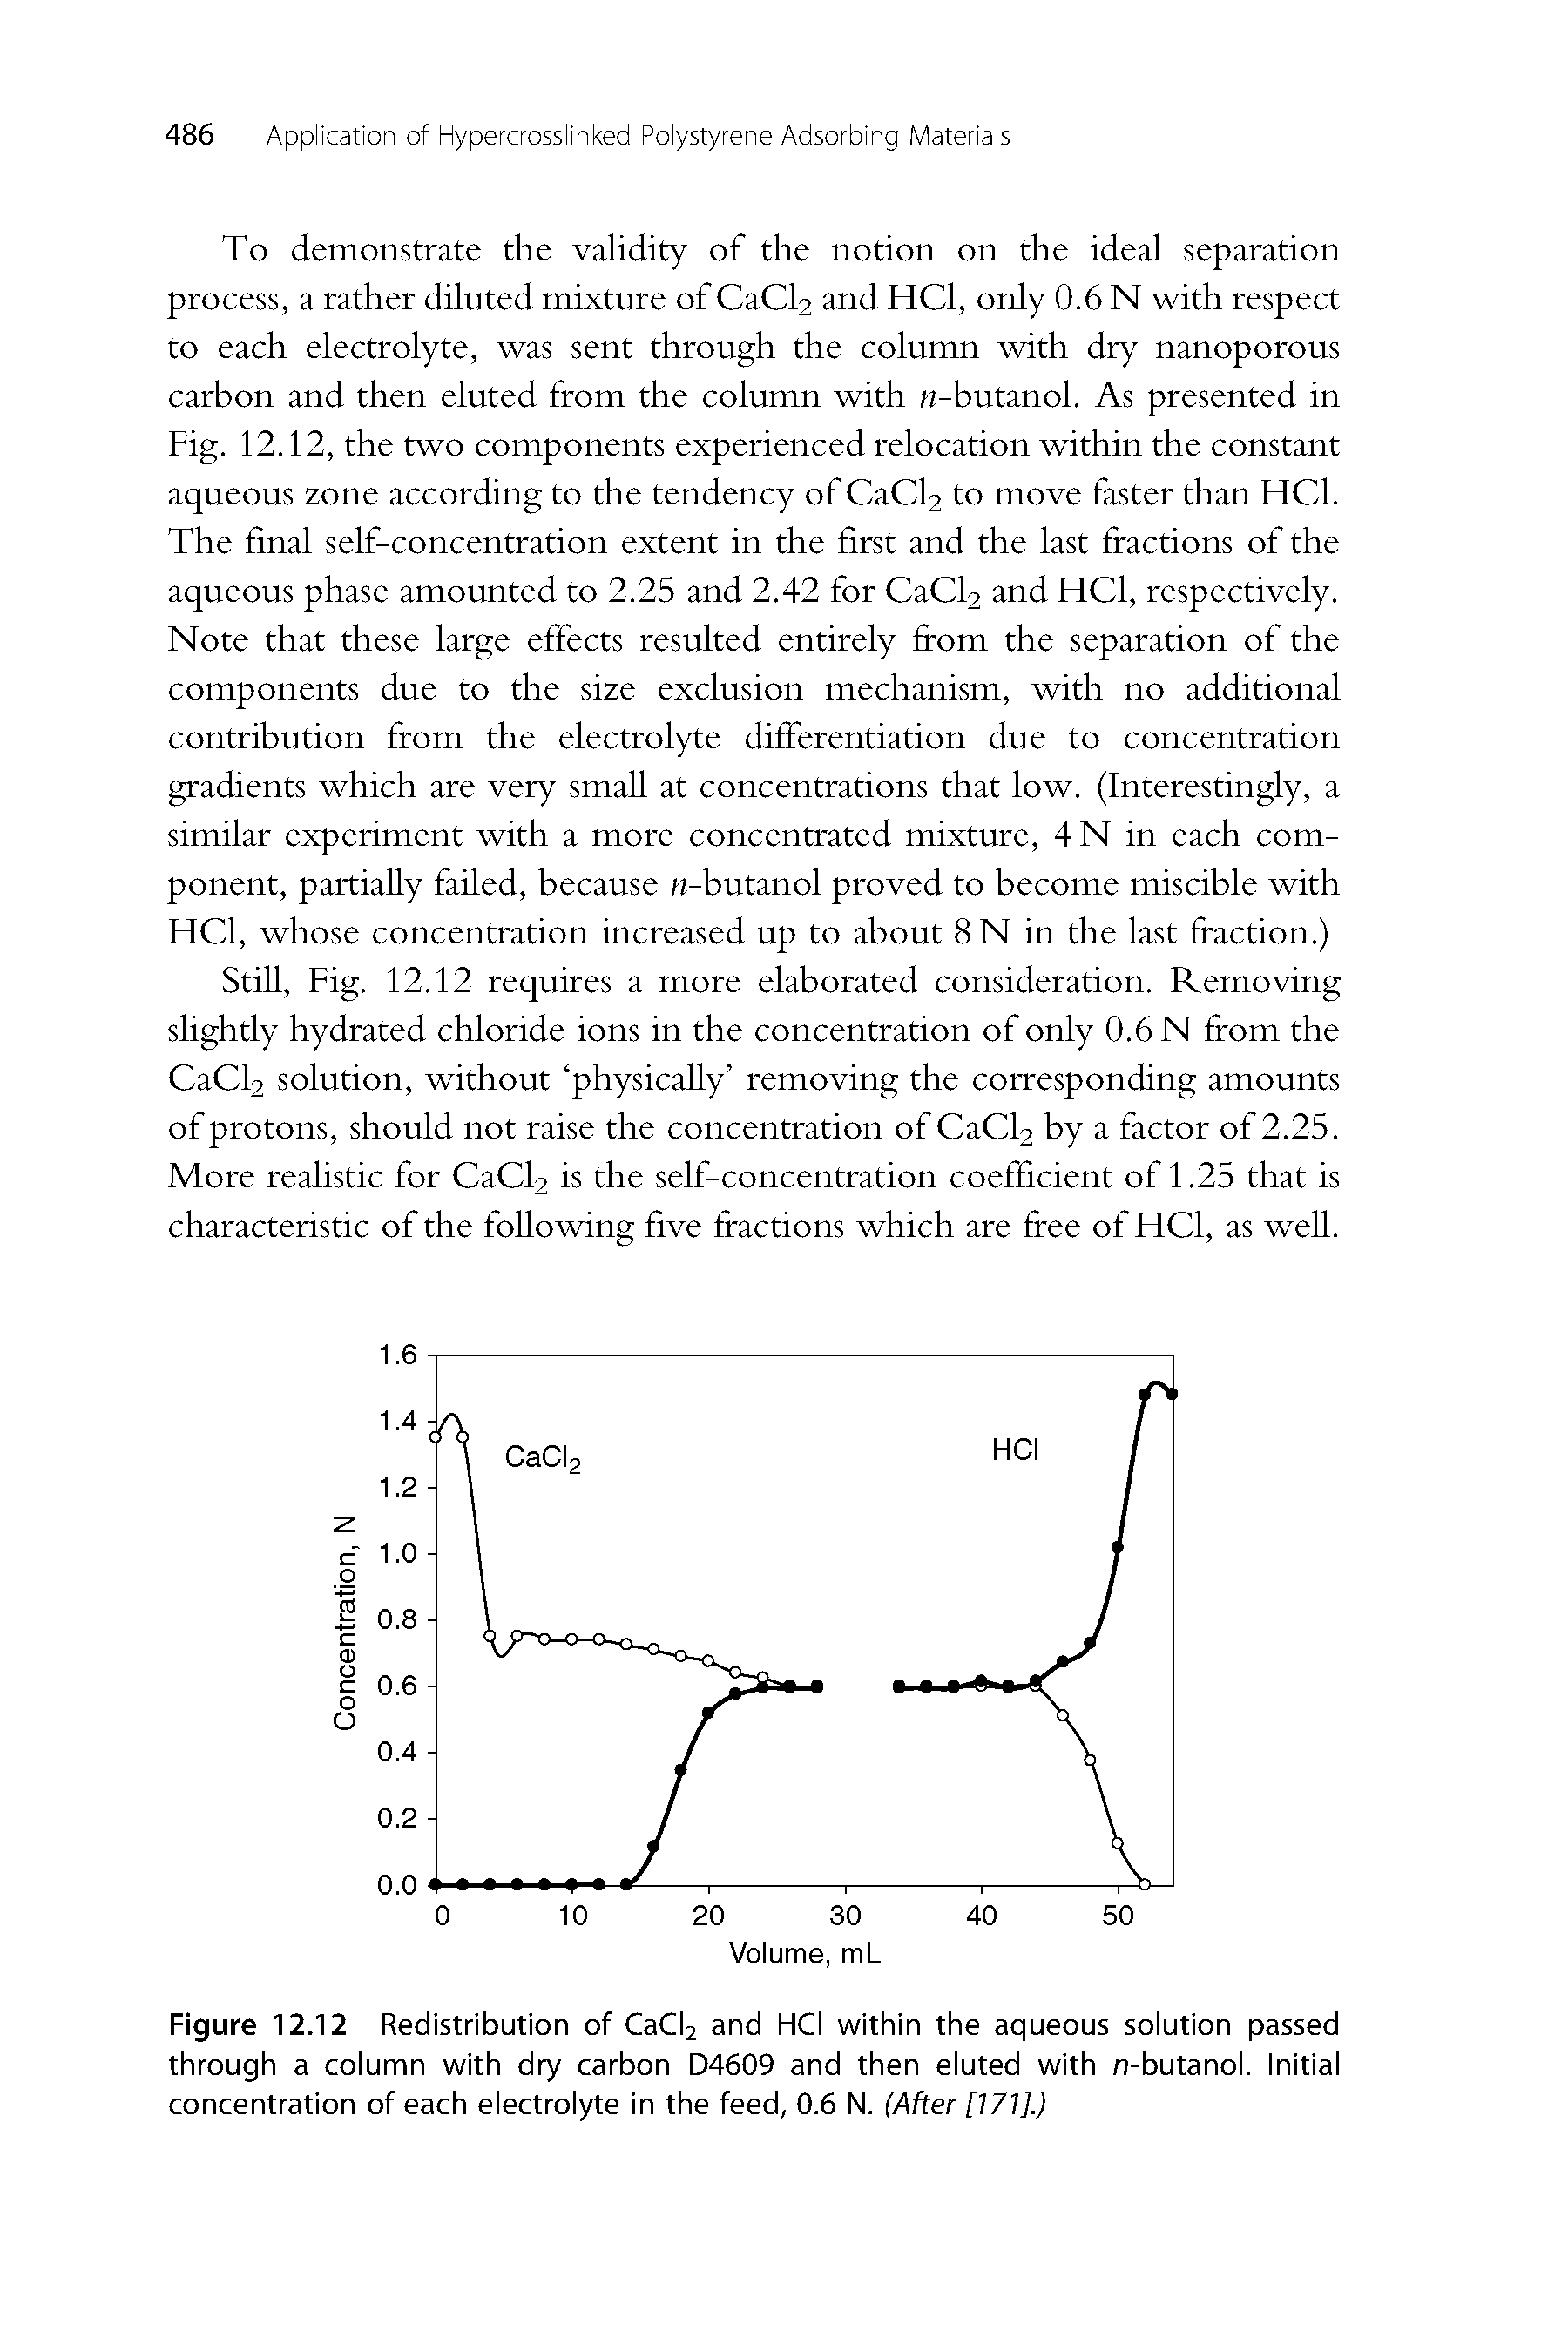 Figure 12.12 Redistribution of CaCl2 and HCl within the aqueous solution passed through a column with dry carbon D4609 and then eluted with n-butanol. Initial concentration of each electrolyte in the feed, 0.6 N. (After [171].)...